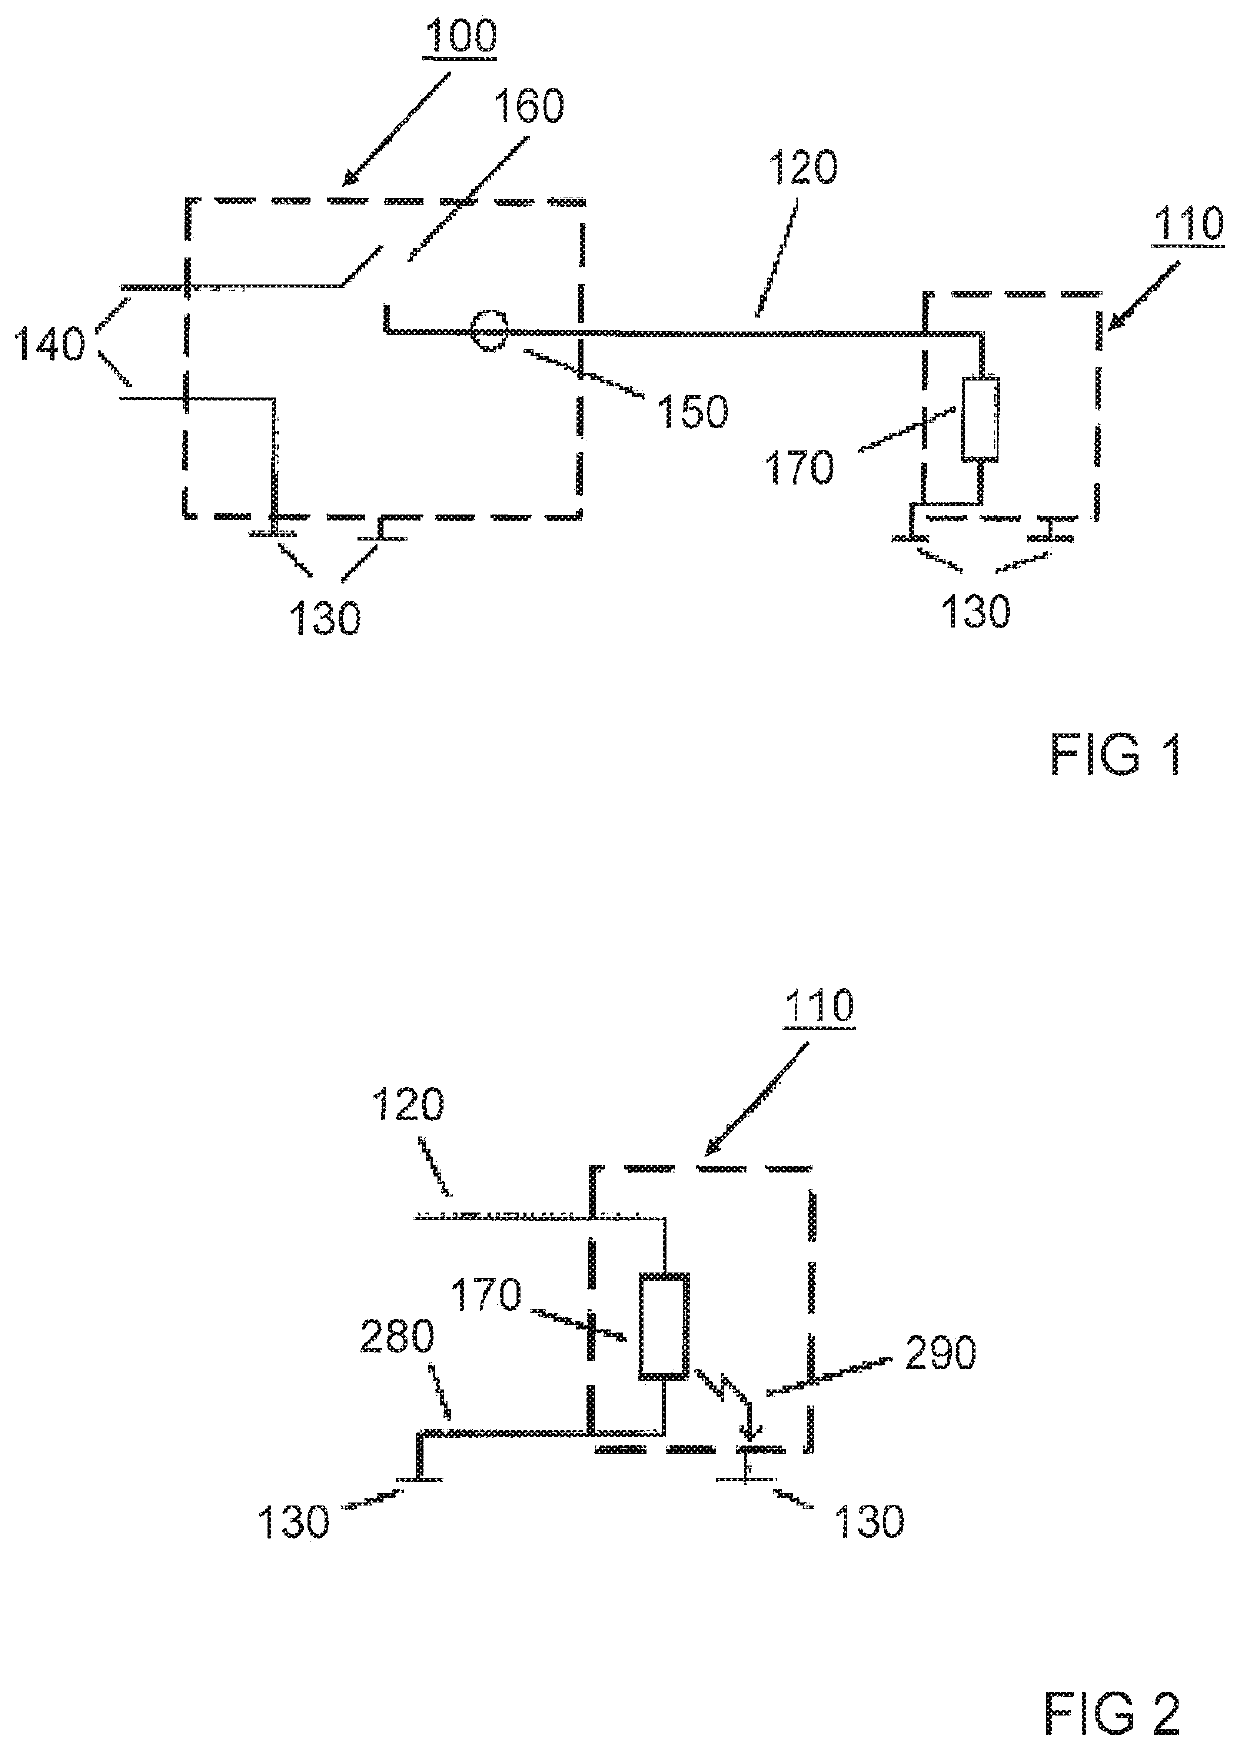 Fault current sensor for a fault current protection device for monitoring an electrical consumer for a vehicle